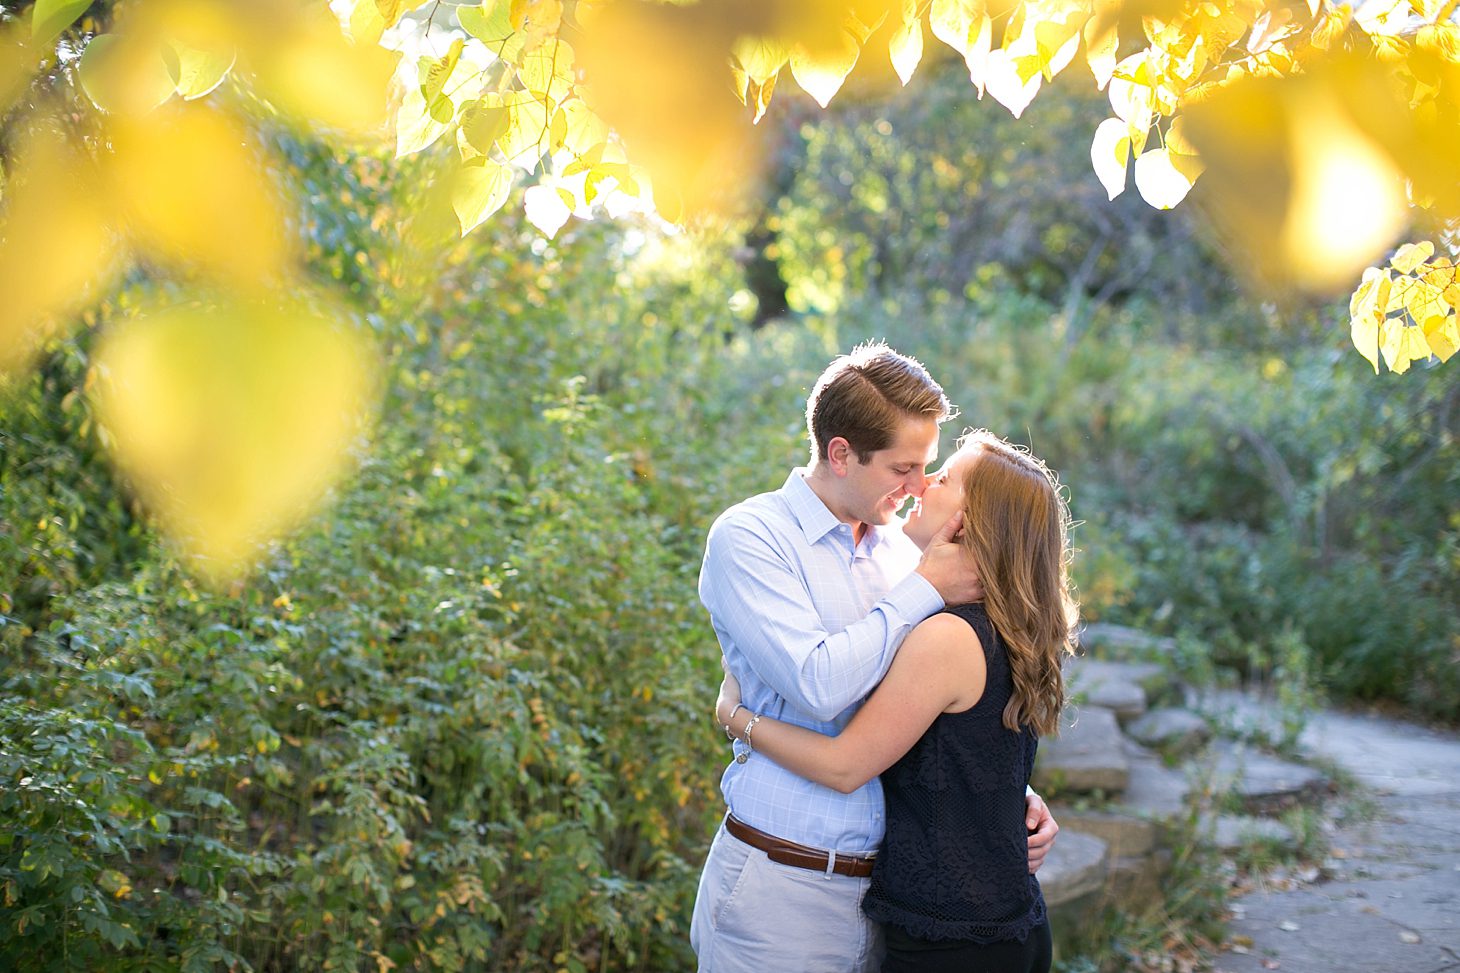 Lily pond & Chicago skyline engagement photos by Christy Tyler Photography_0006